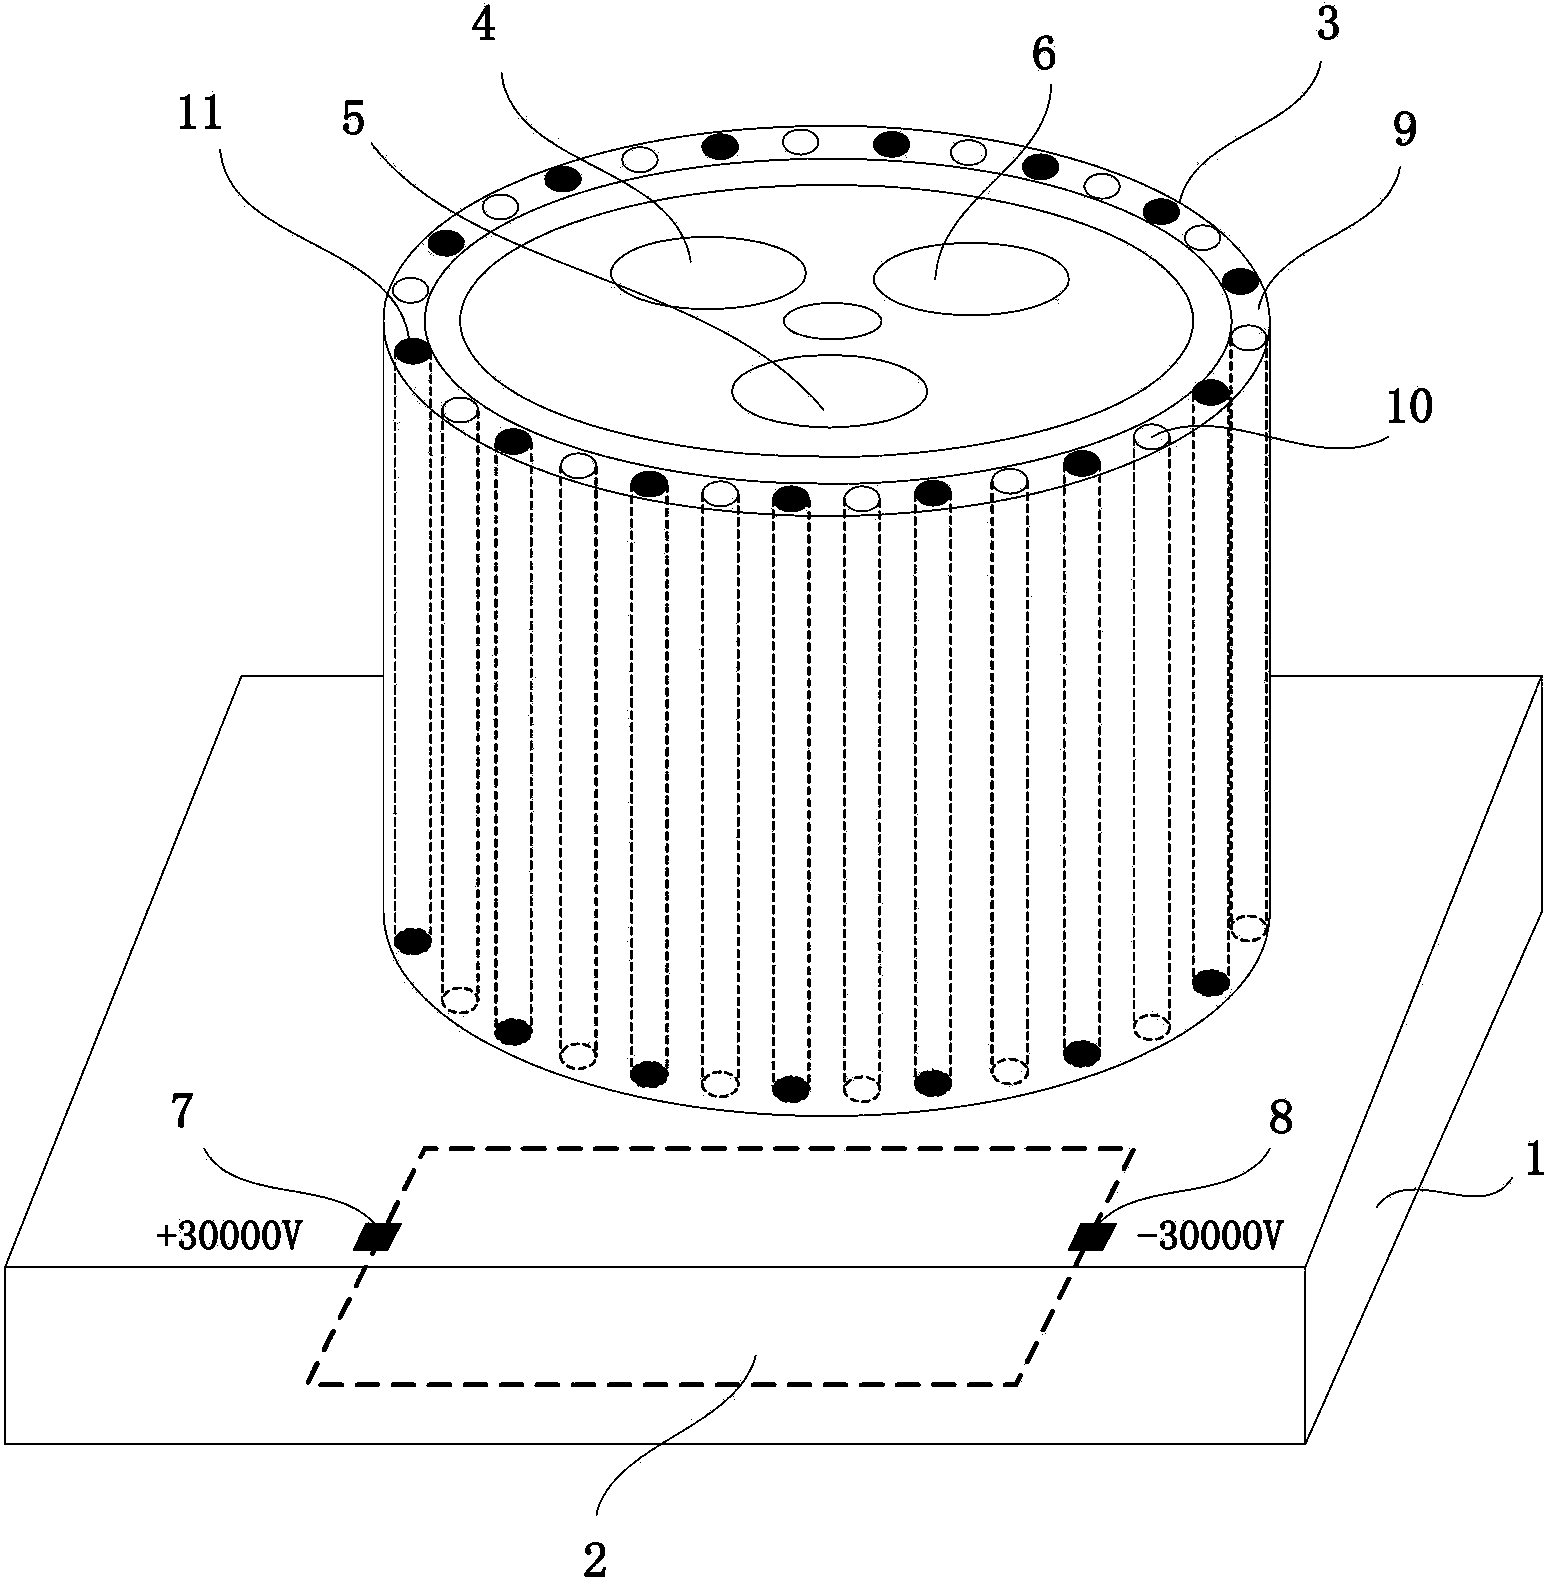 Devices for actively attracting flying insects and purifying air and water